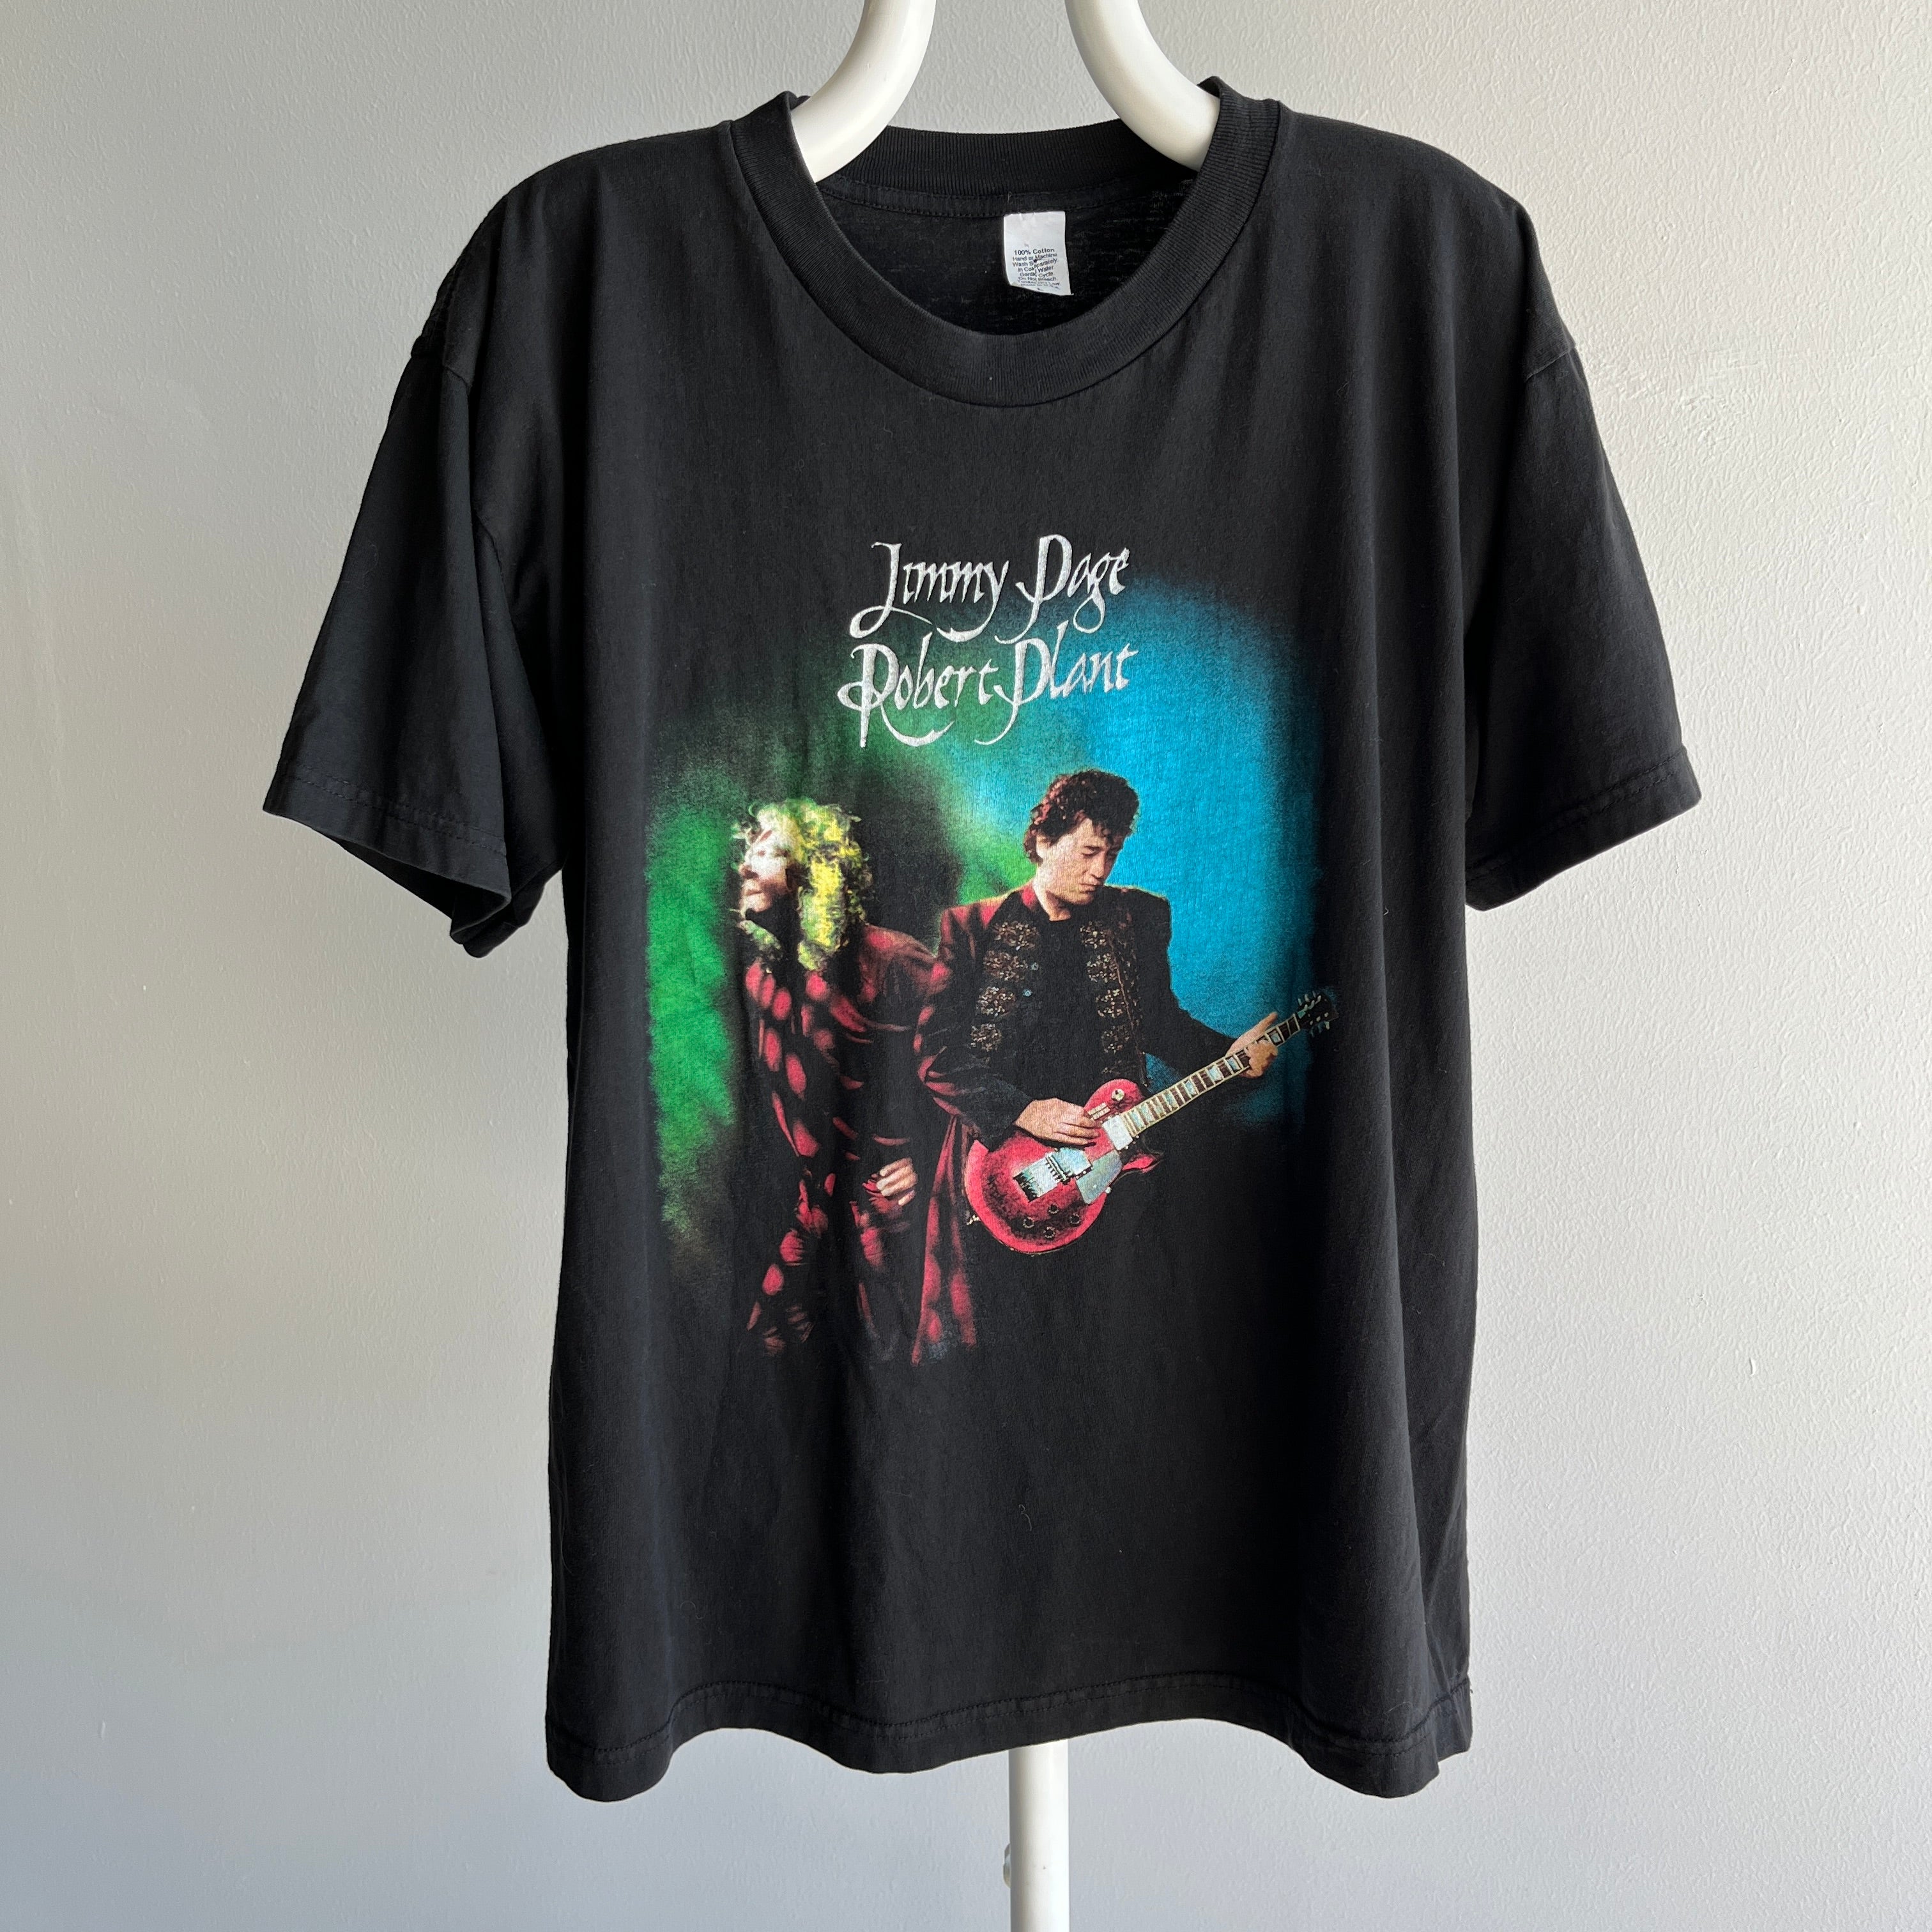 1998 Jimmy Page & Robert Plant of Led Zeppelin T-Shirt